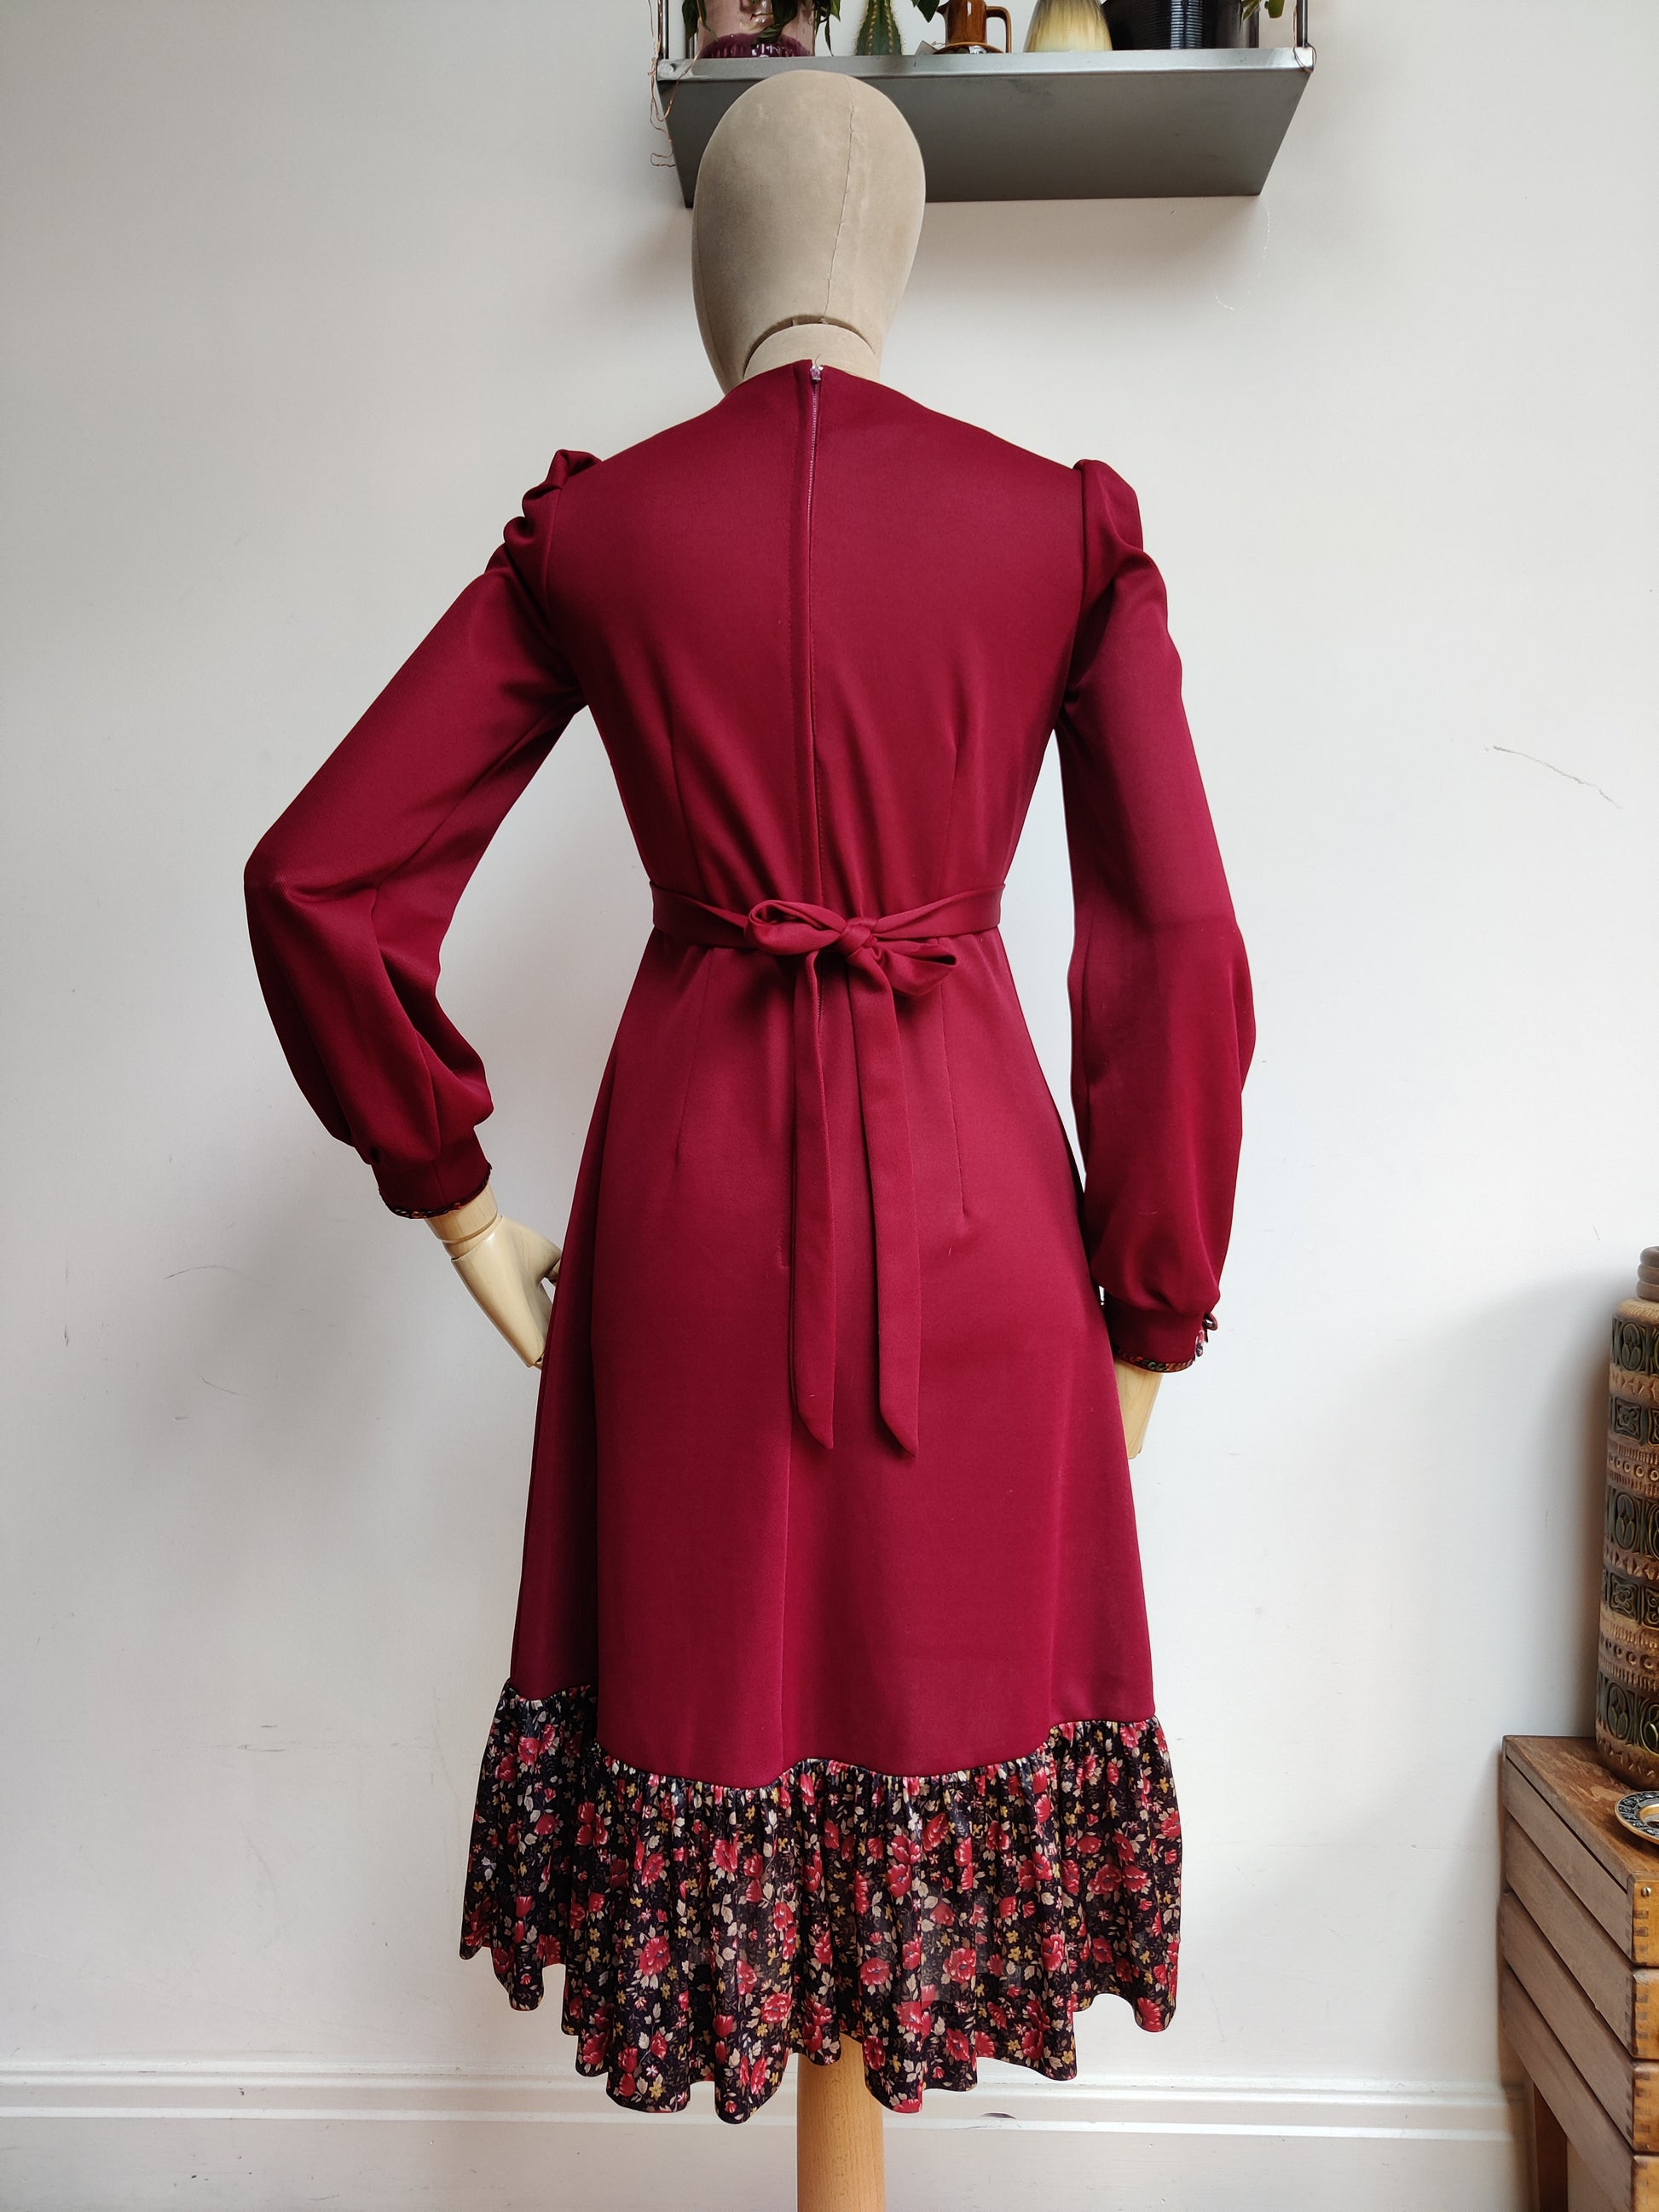 70s dress with floral frill and long sleeves